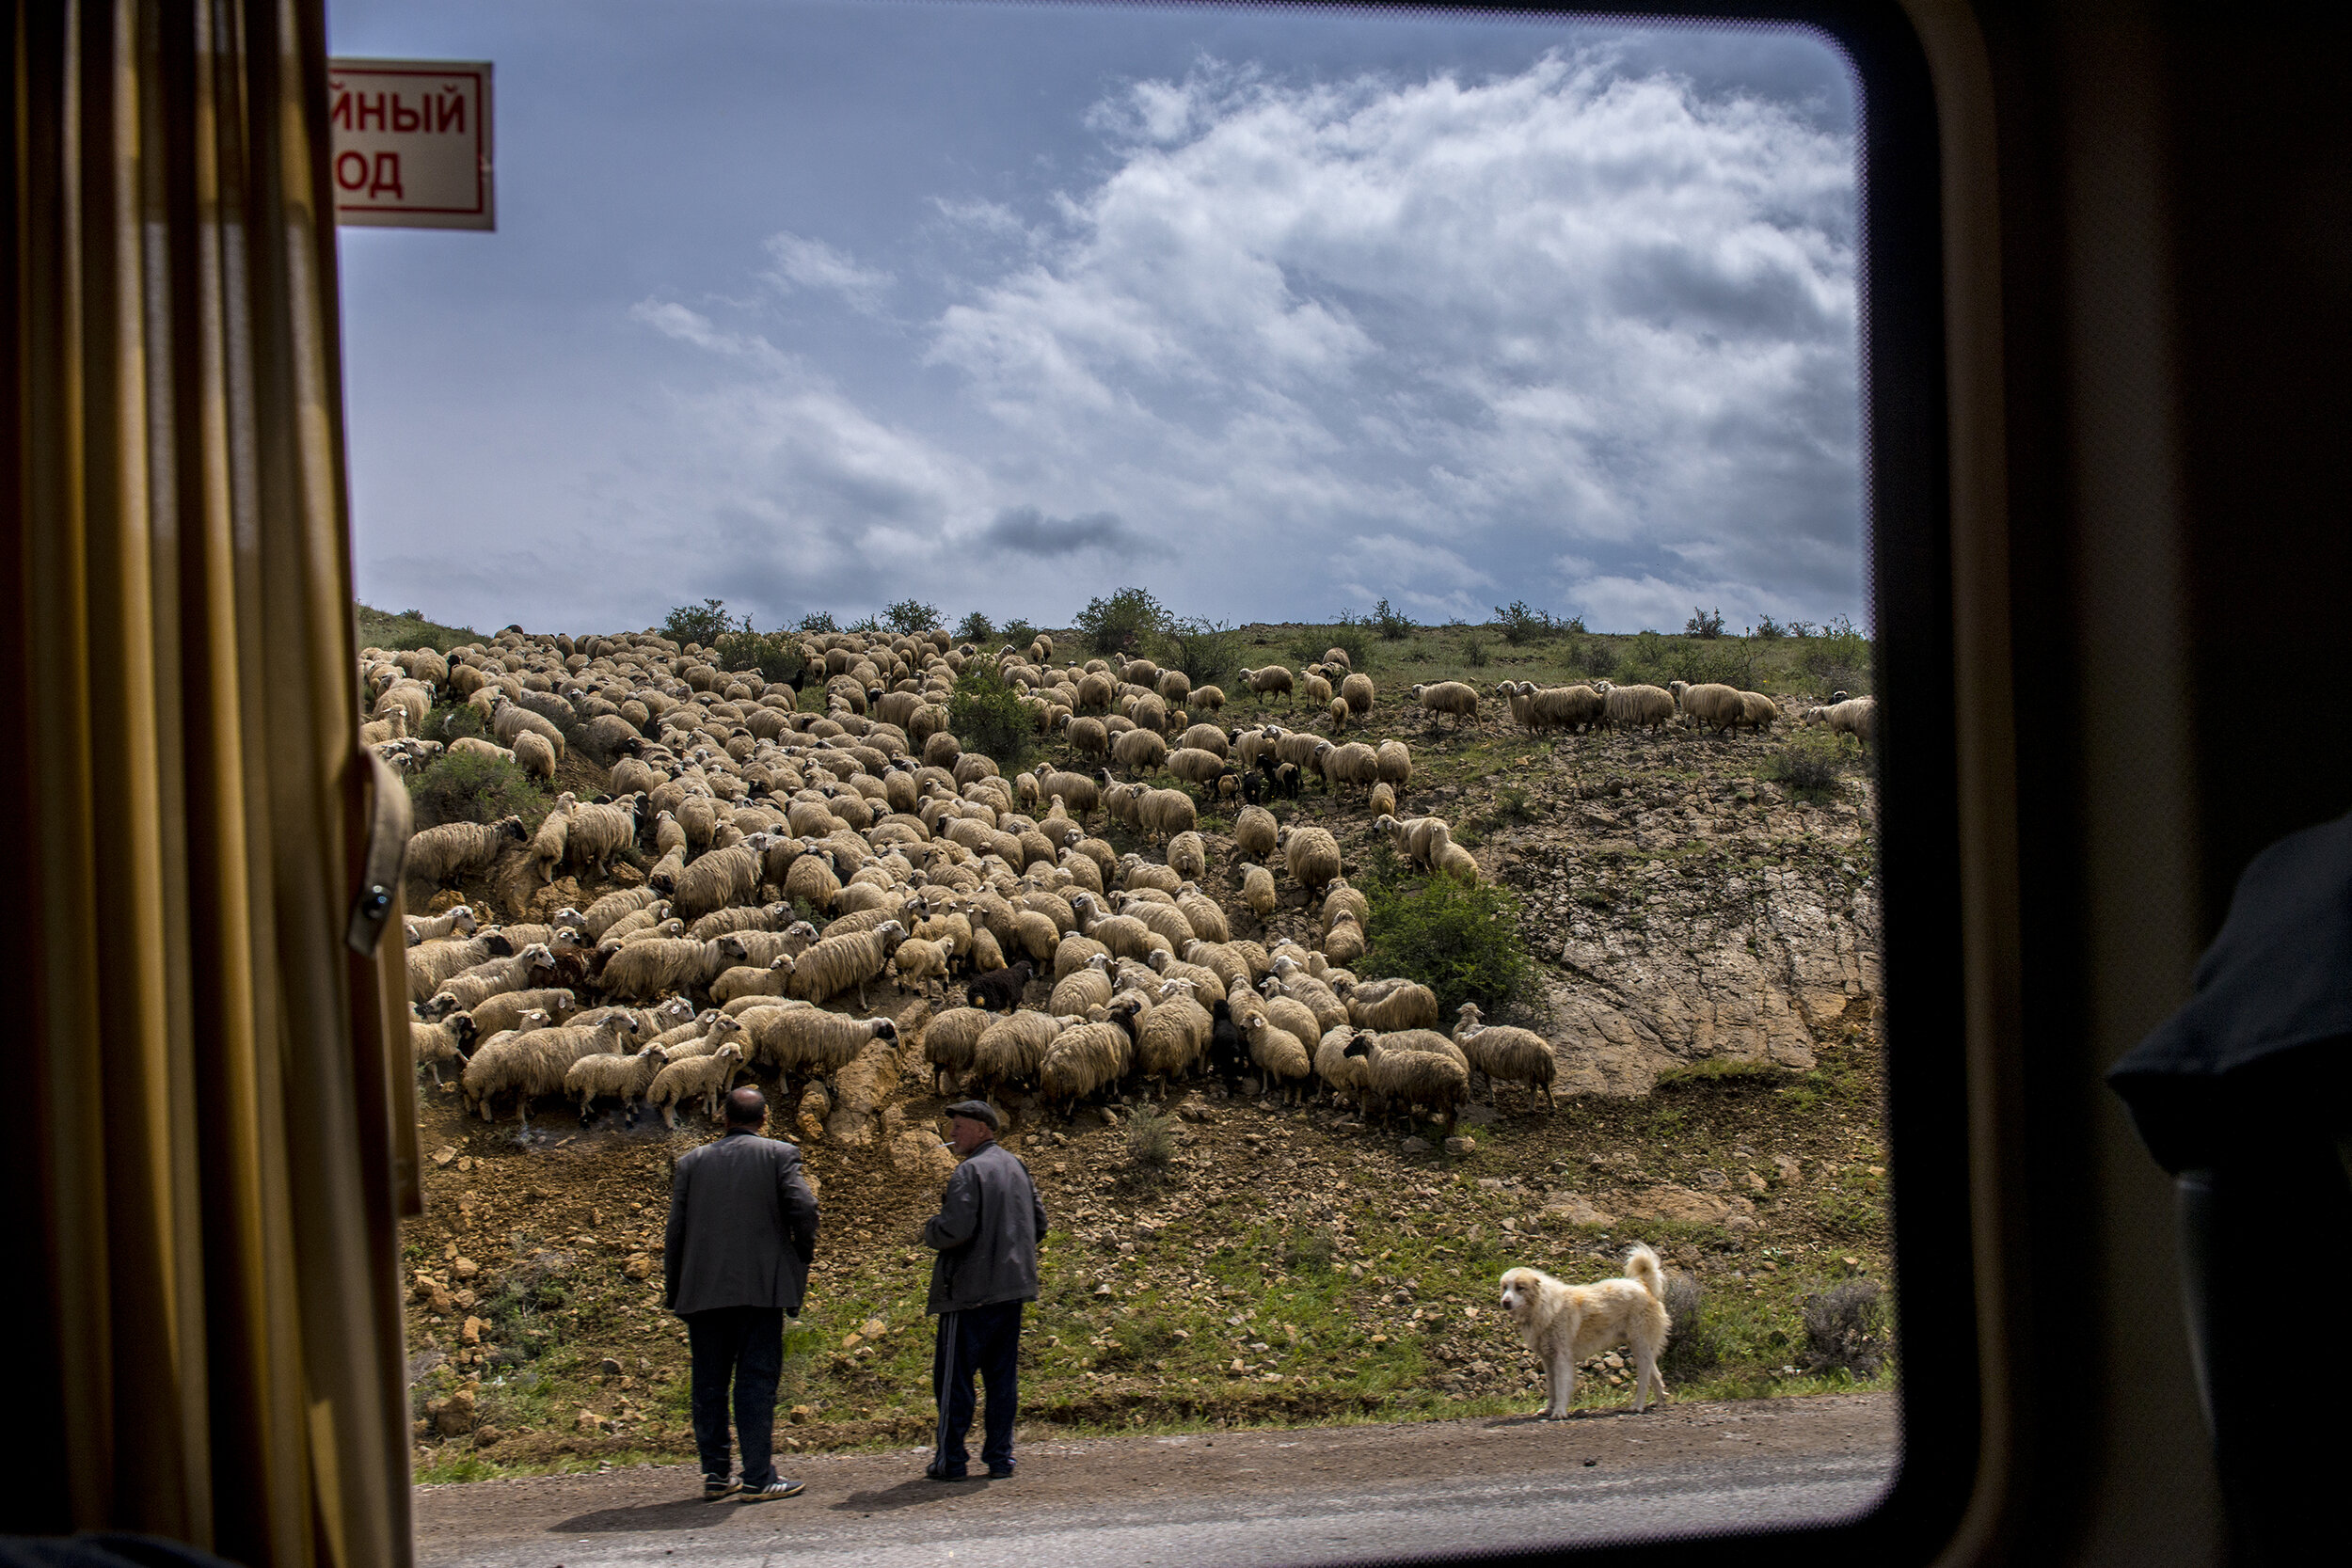  Shepherds herd a flock of sheep near the Lachin corridor, a mountainous pass connecting the NKR to Armenia.  The NKR had a state-of-the-art airport, but Azerbaijan threatened to shoot down all air traffic.  With its sheer cliffs and hairpin turns, t